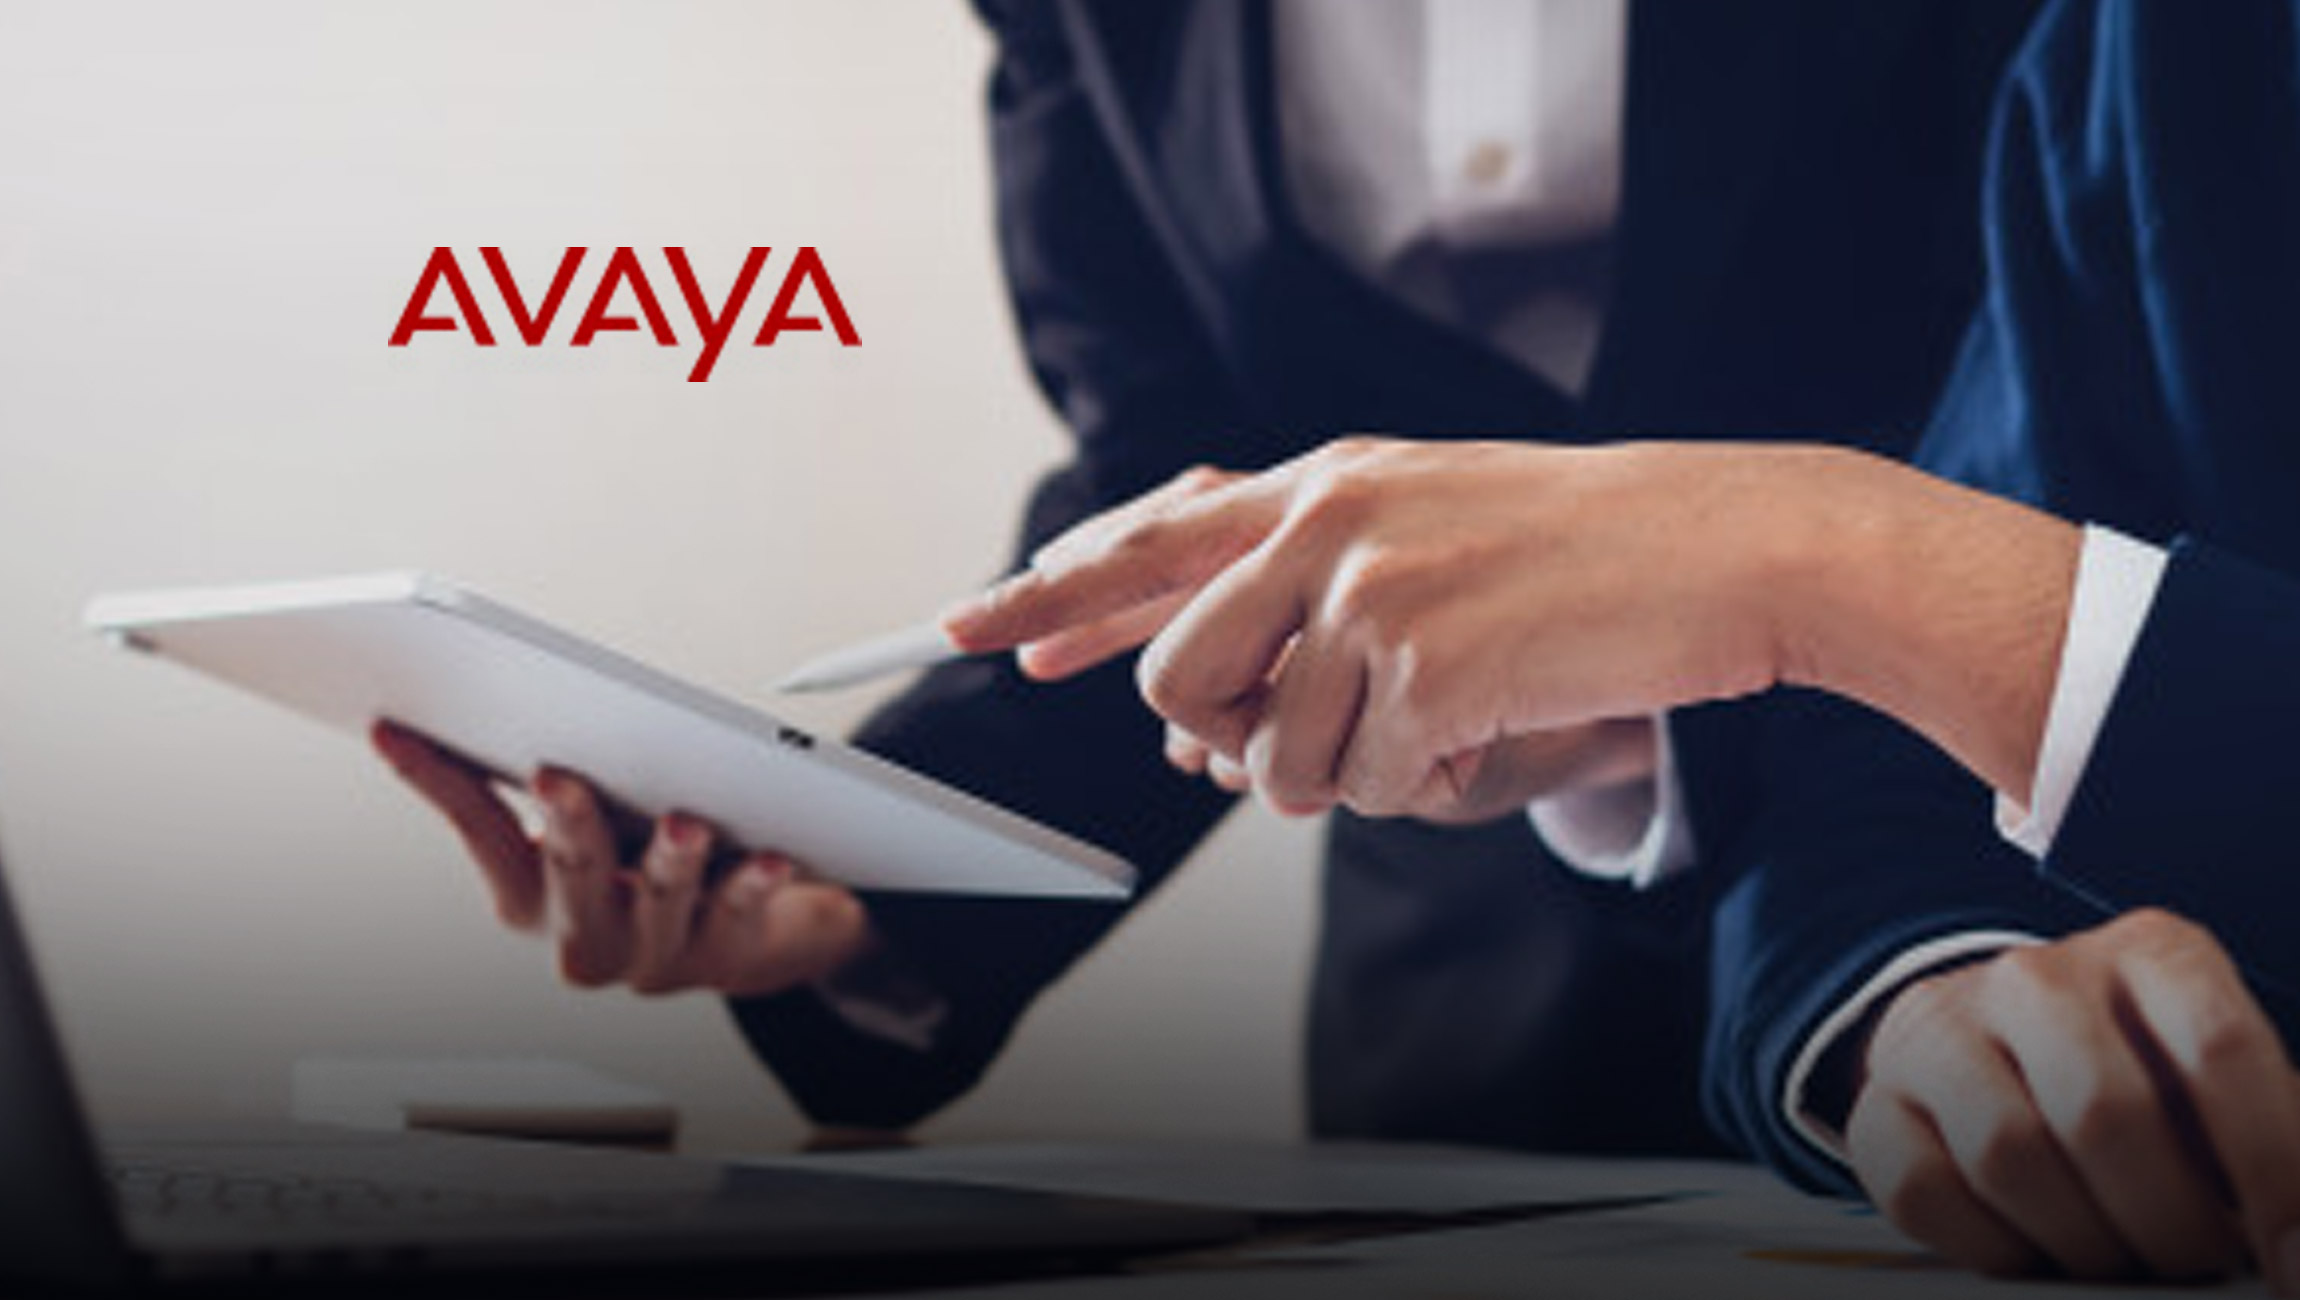 Avaya Recognized by Leader in Conversational AI, Nuance Communications, for AI-Powered Solutions That Enable Customers and Employees to Work Smarter Together